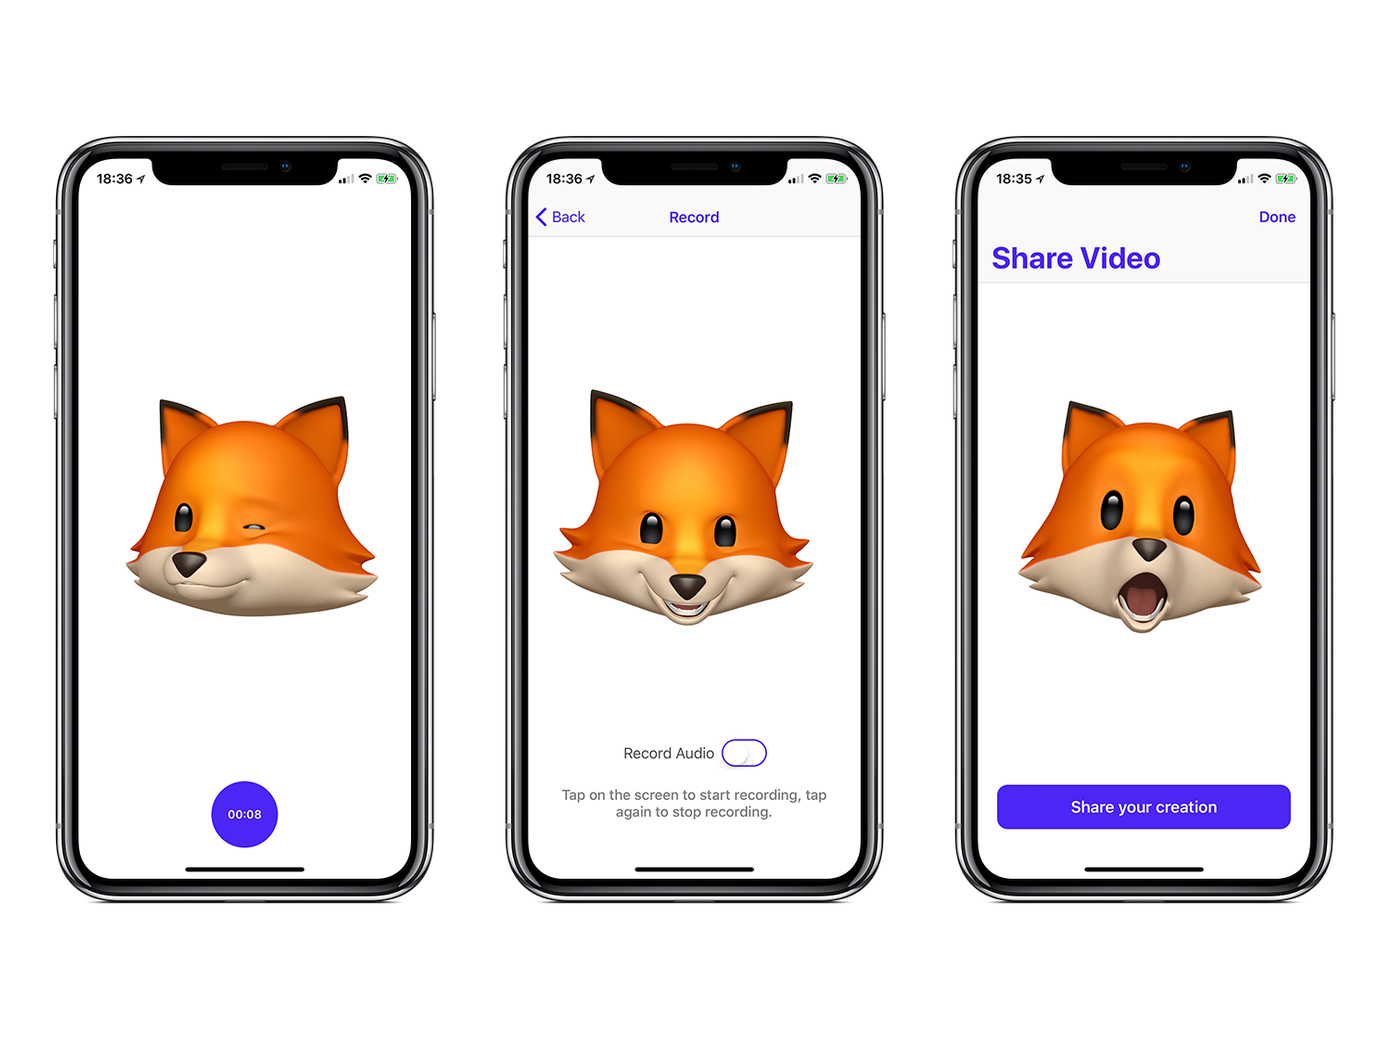 Three iPhone Xs with AnimojiStudio pulled up on the screen. On the first phone, there is an Anomoji of a fox winking. On the second phone, there's an Animoji of a fox making a mischievous face. On the third phone, there is an Animoji of a fox with its mouth open, as if it's singing.